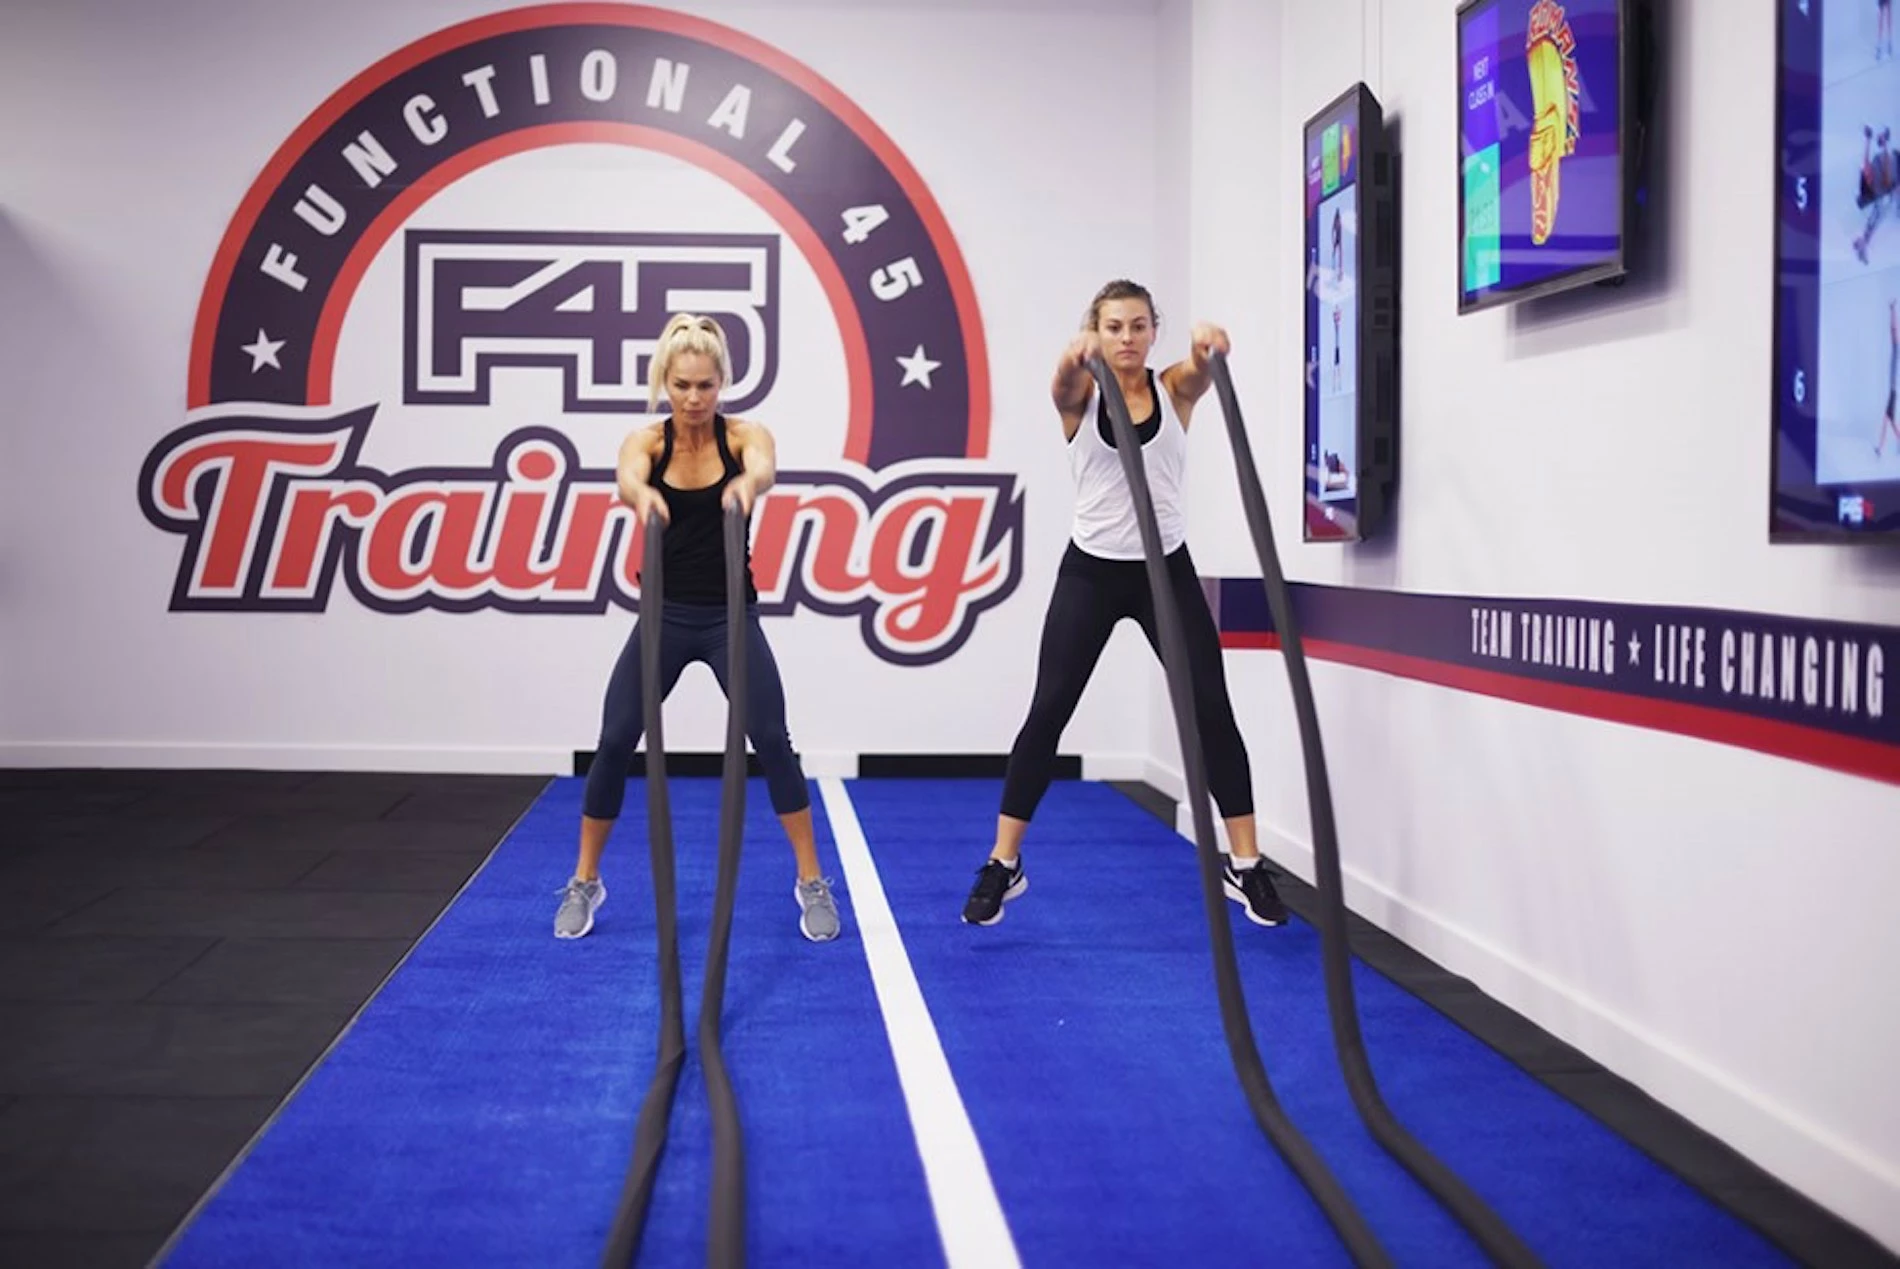 F45 Training is set to open a new site in Harrogate.